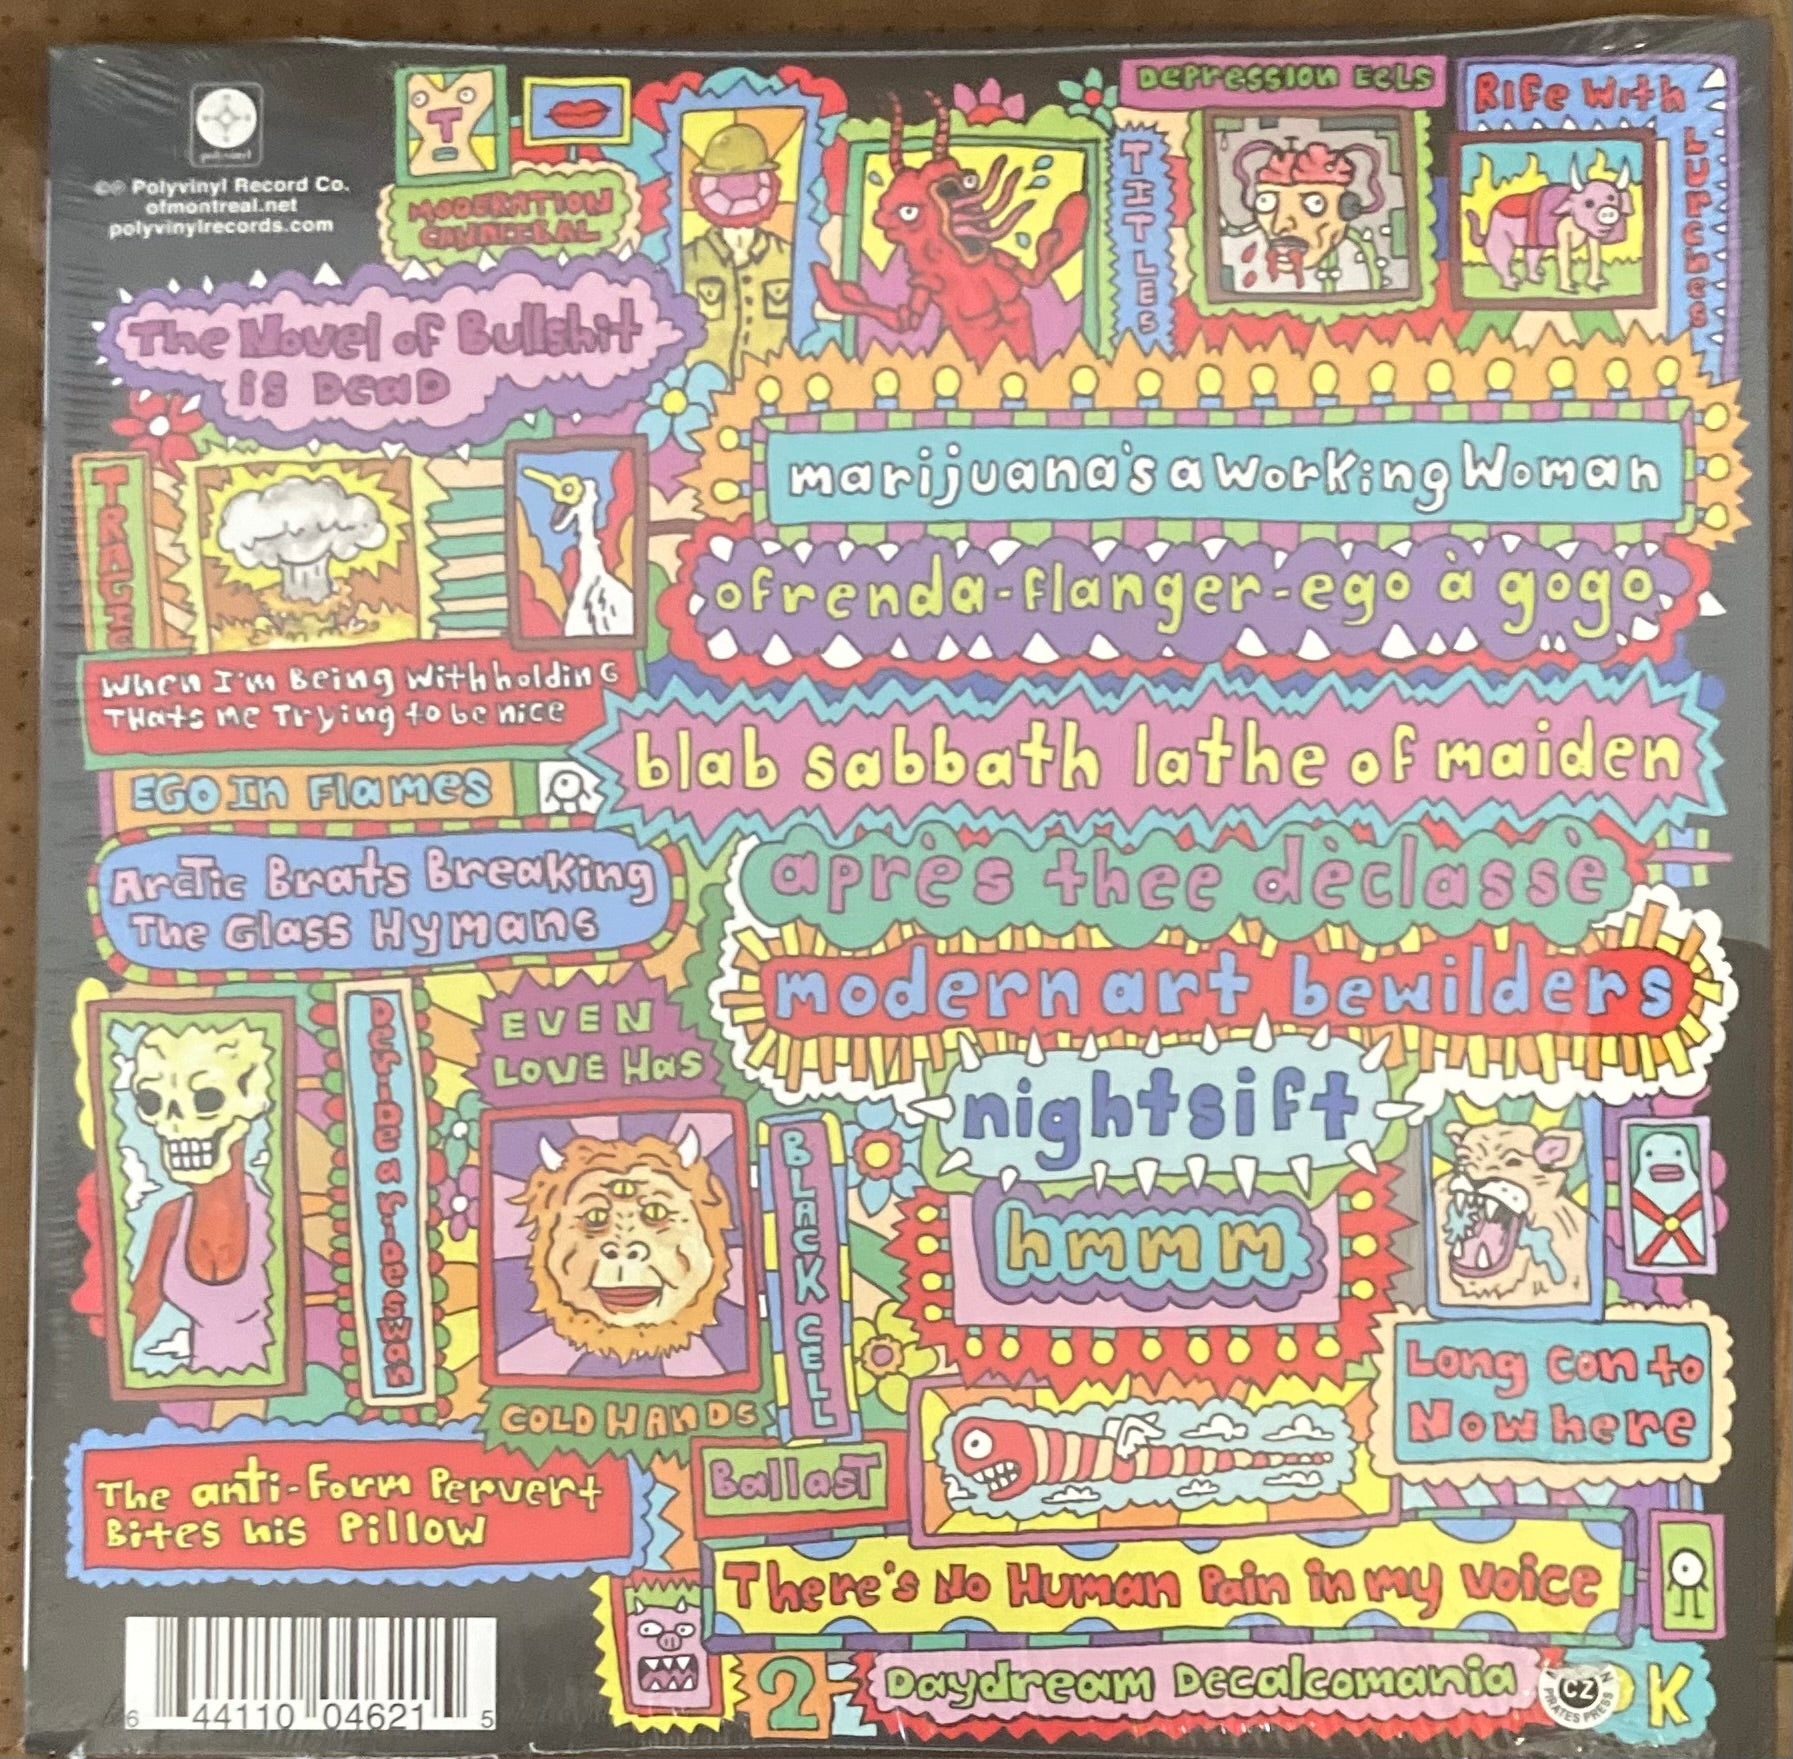 The back of 'Of Montreal - Fuck Fuck Fuck' on vinyl